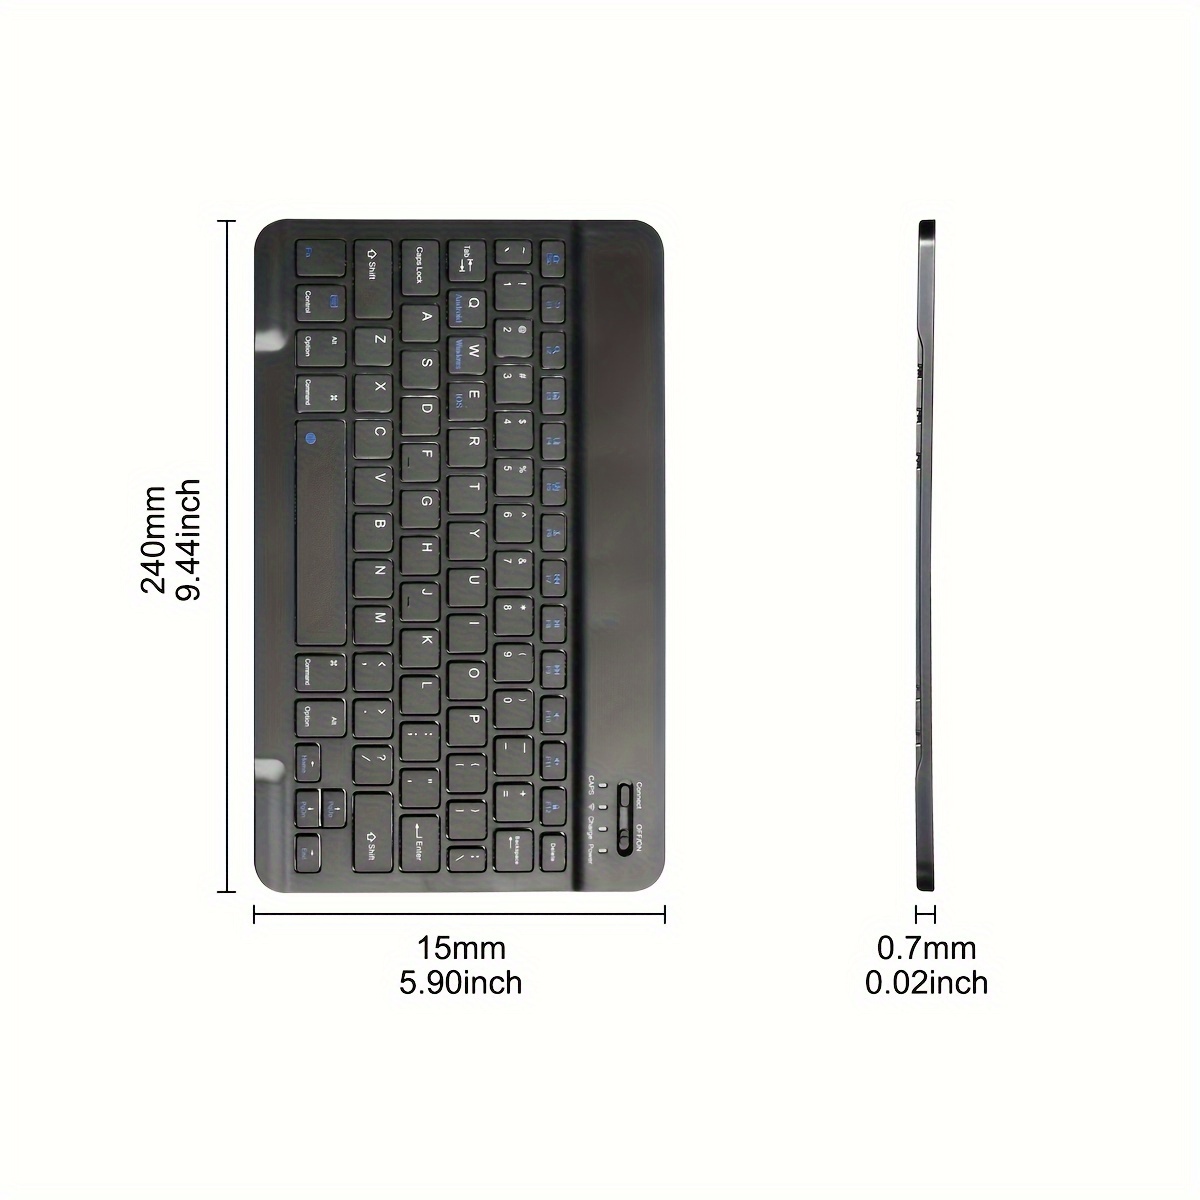 Ultra-Slim Bluetooth Keyboard Portable Mini Wireless Keyboard Rechargeable  for Apple iPad iPhone Samsung Tablet Phone Smartphone iOS Android Windows